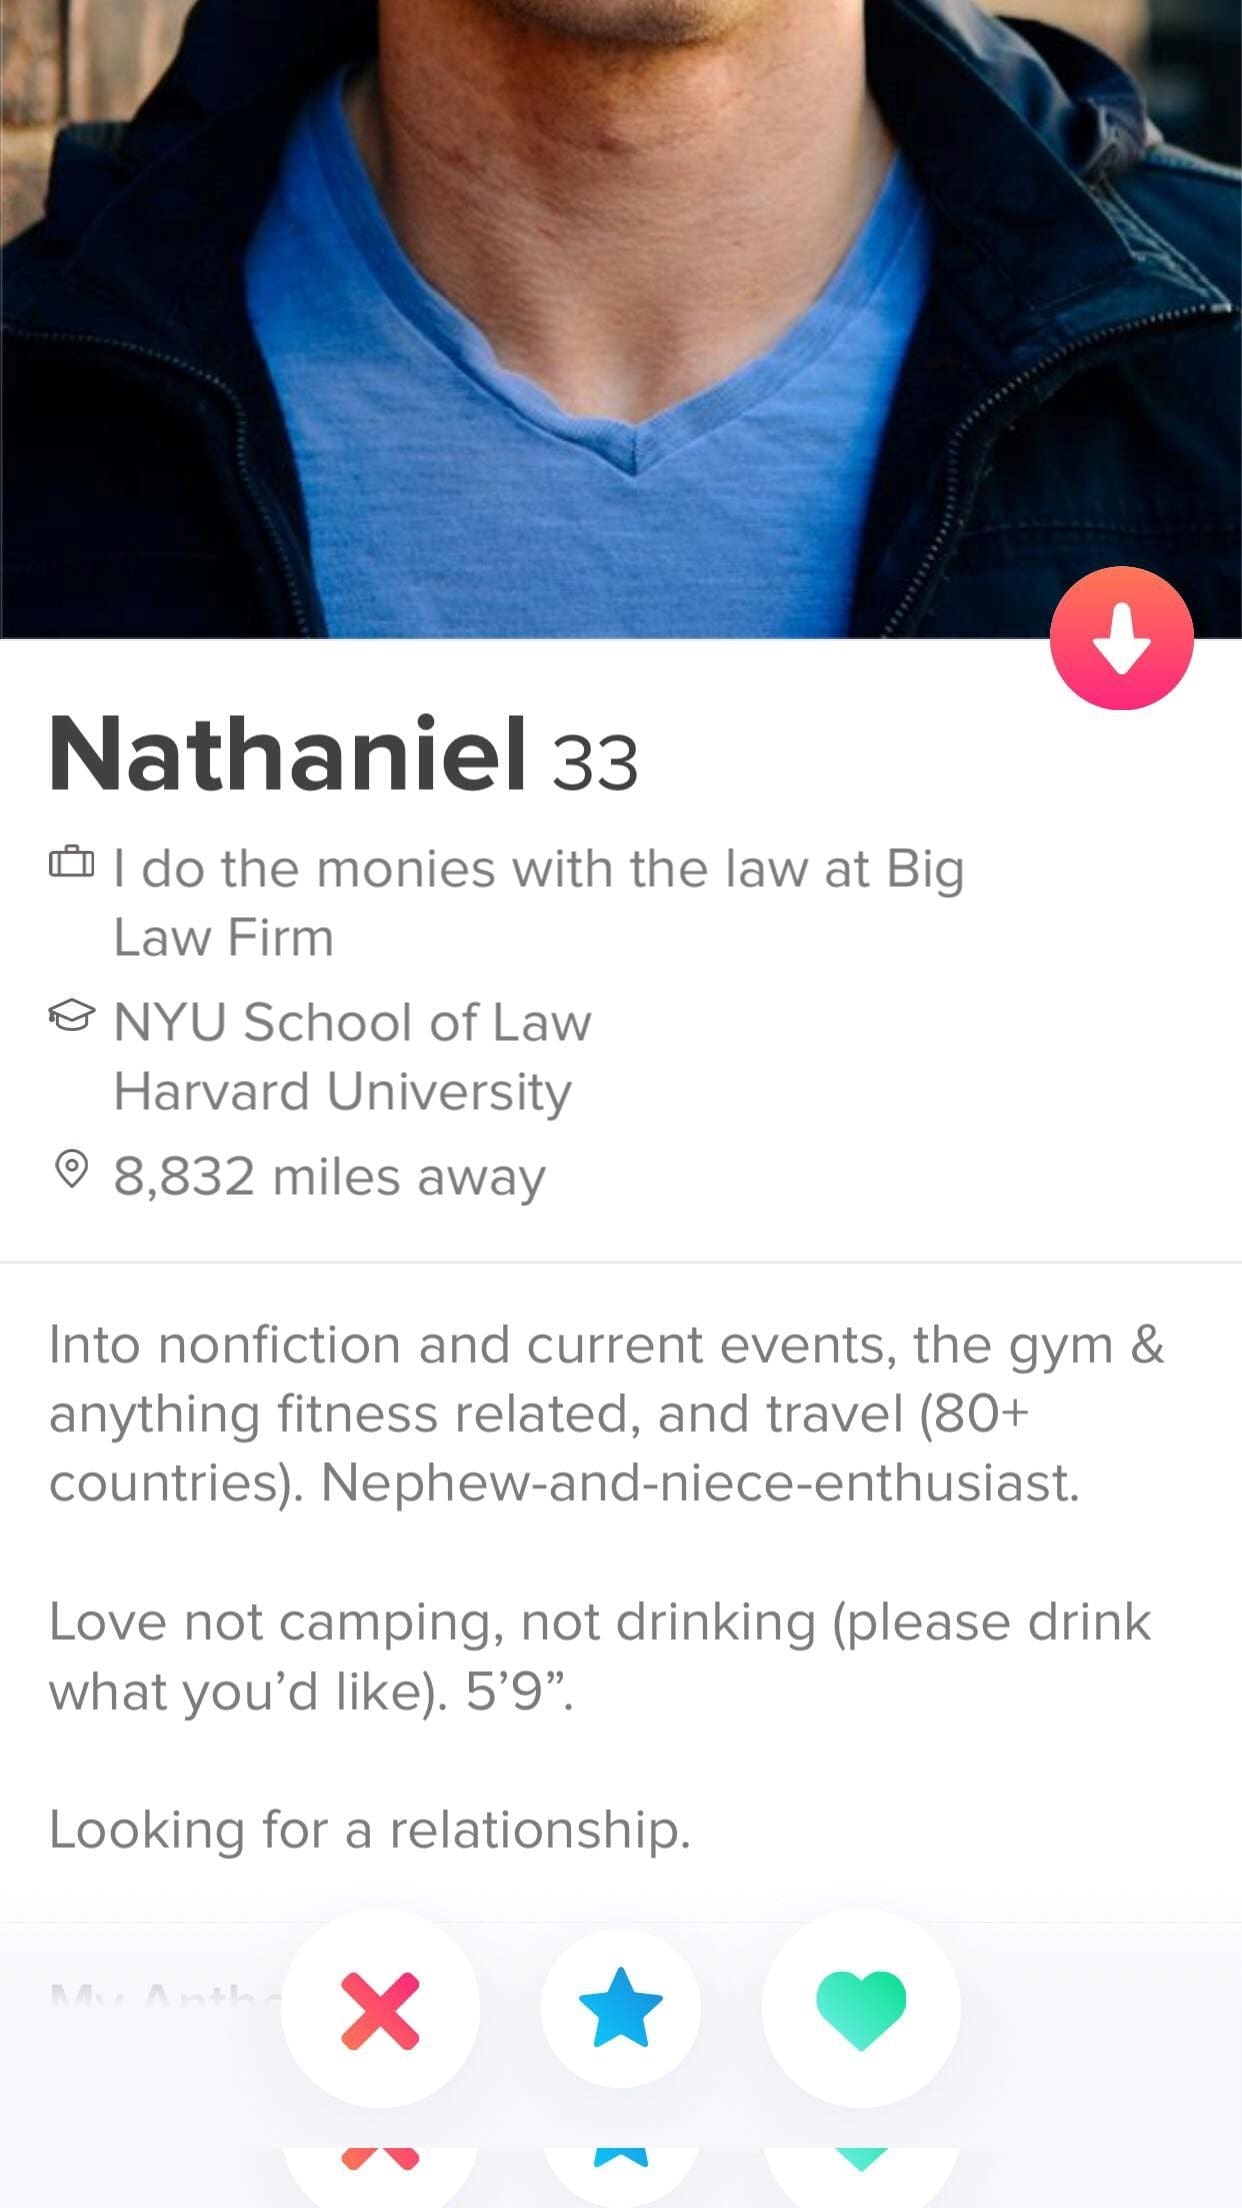 Dating profile tips for guys